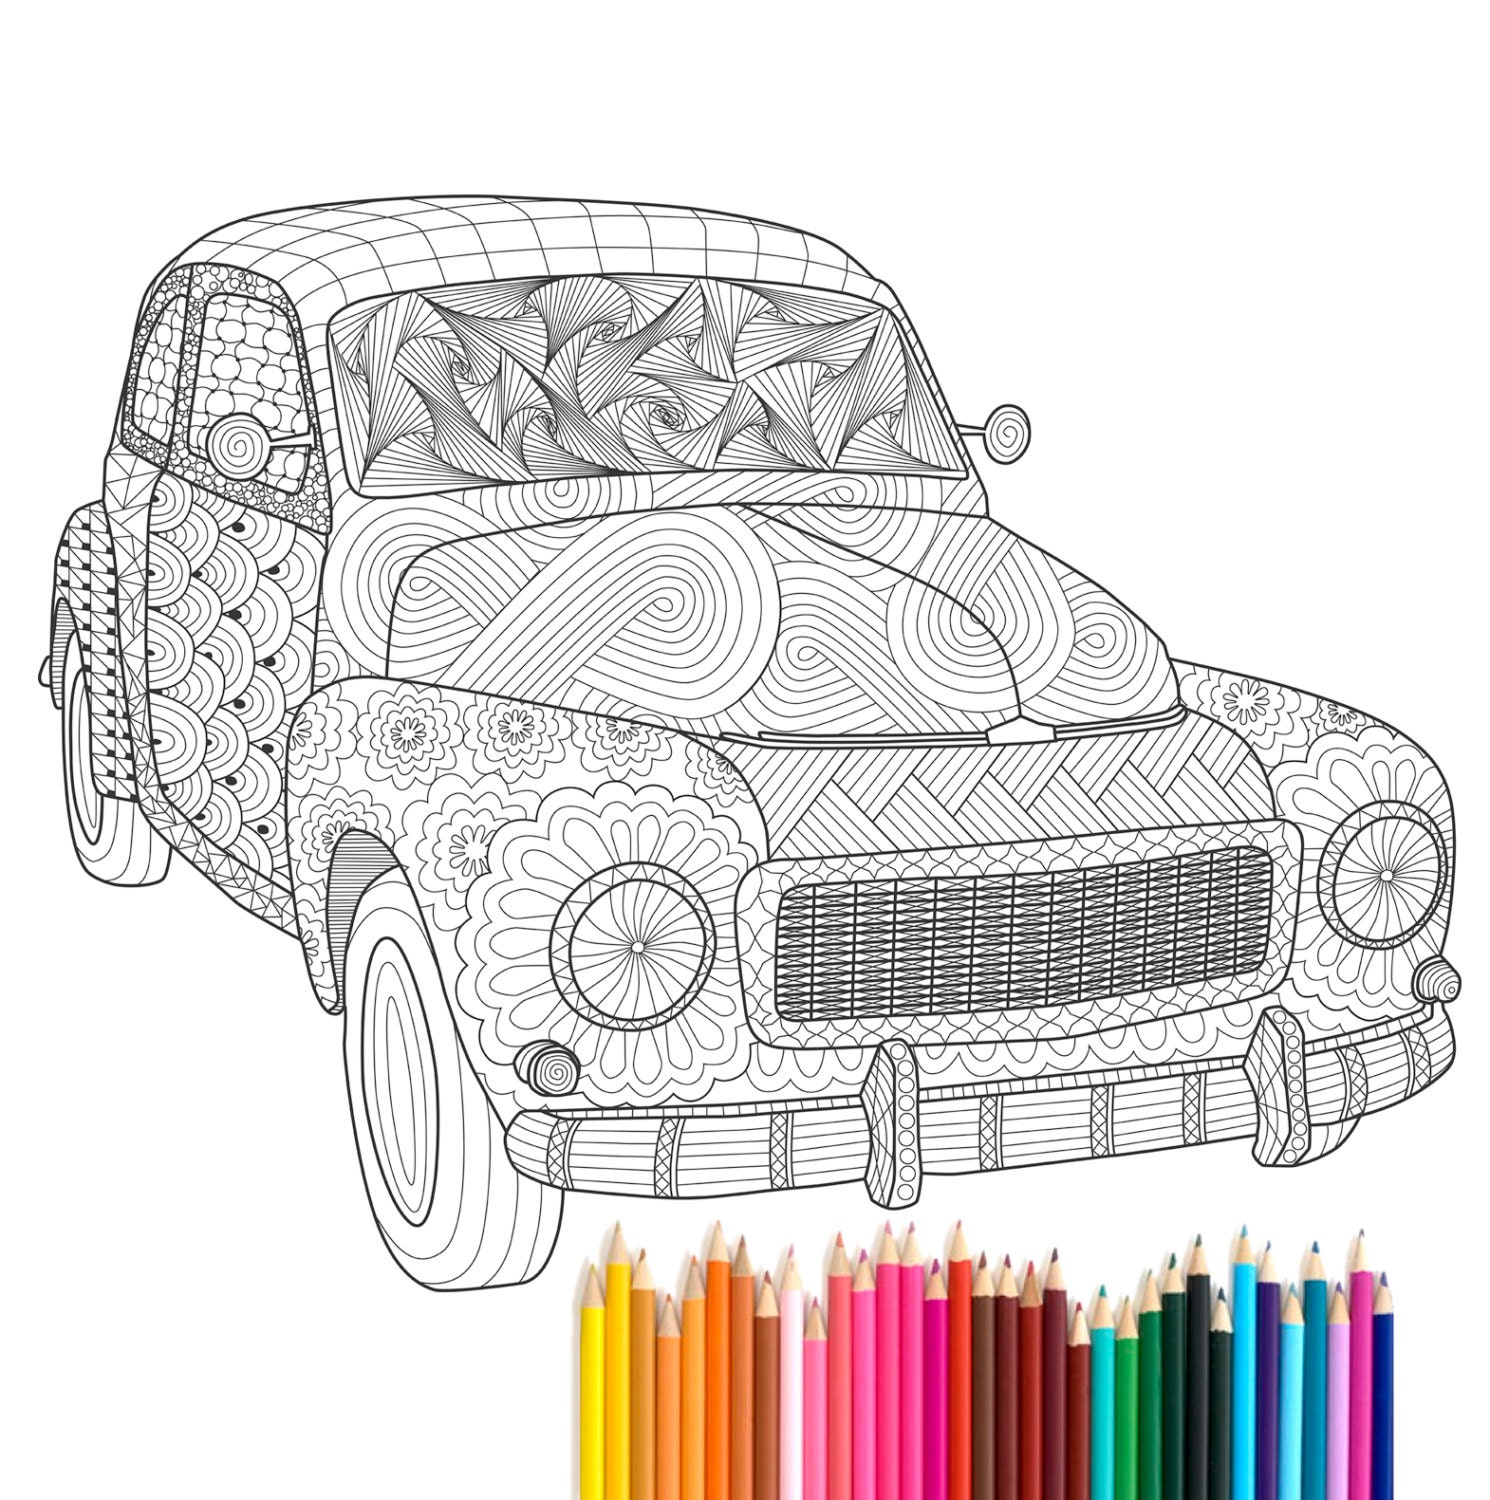 PDF printable Adult Coloring Page Zentangle Volvo PV544 by